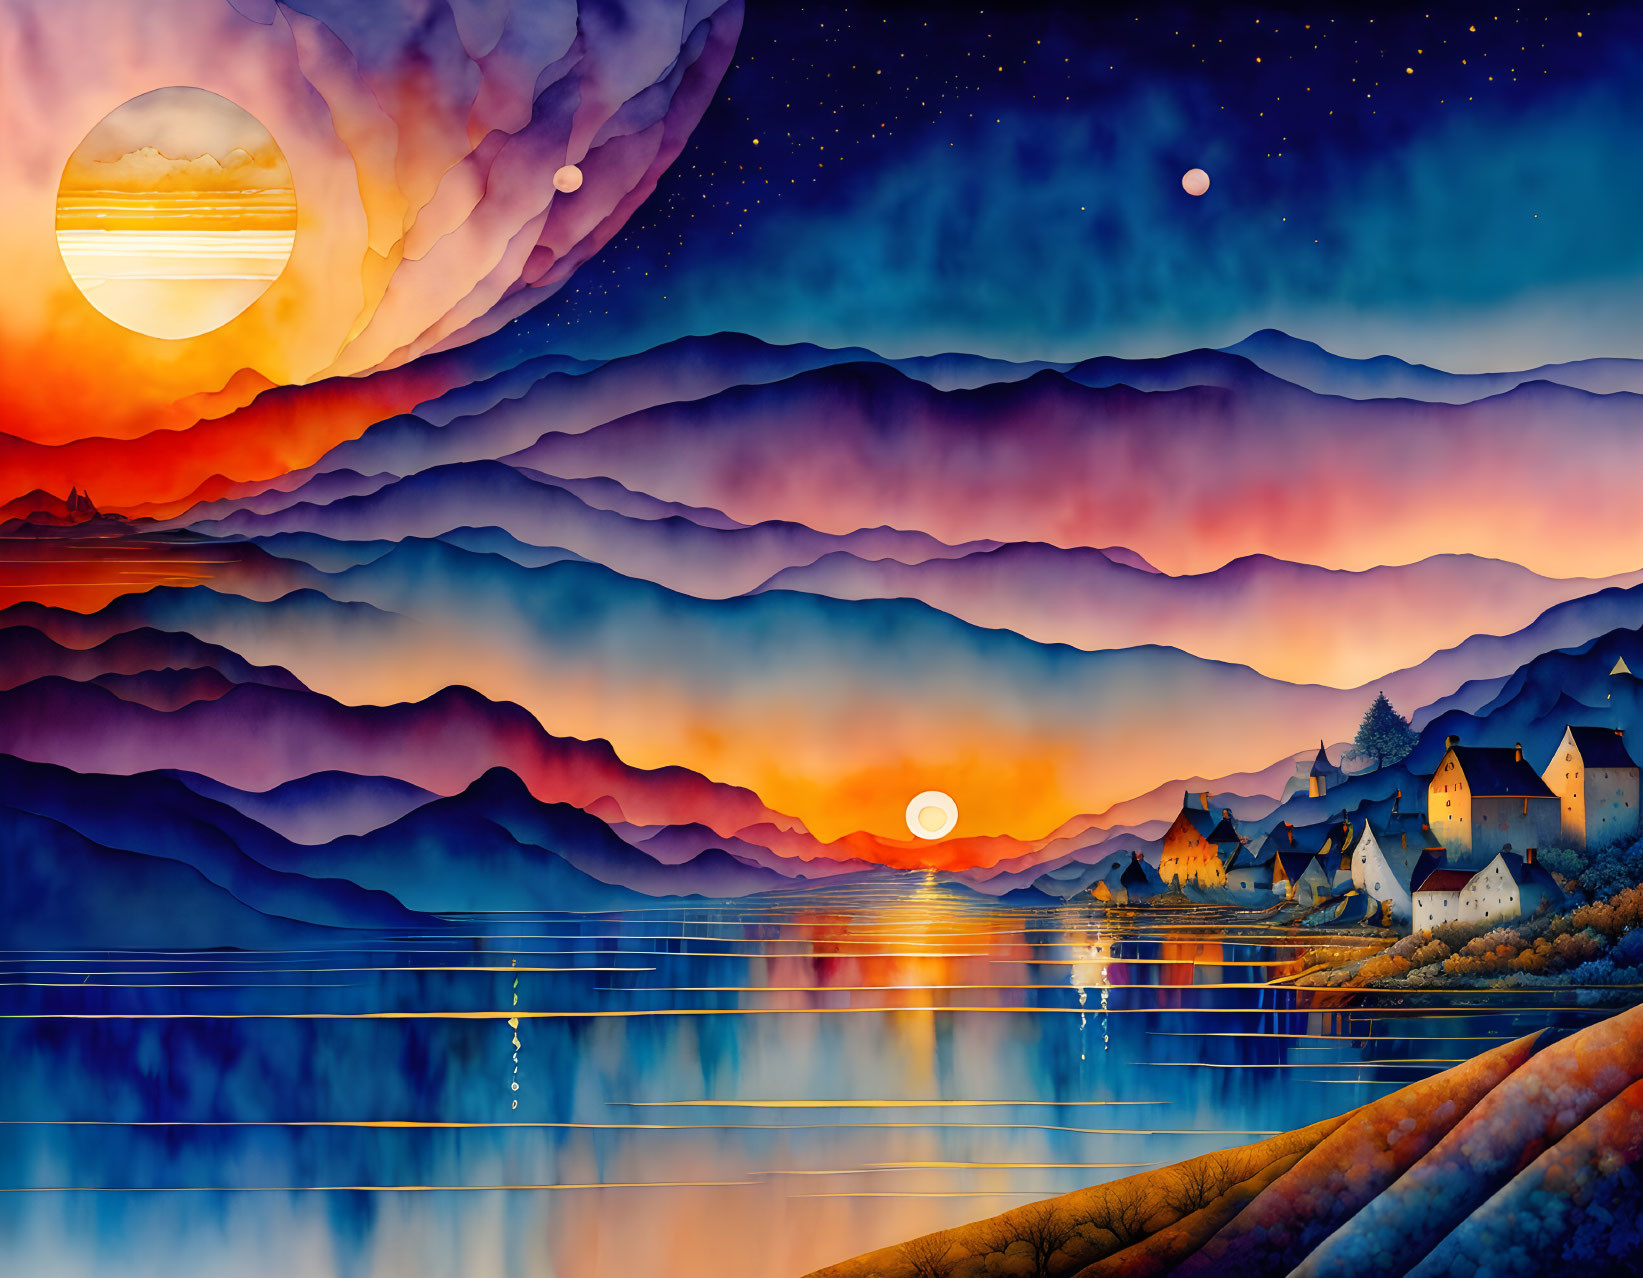 Colorful layered mountains, reflective lake, village, oversized moon in surreal landscape